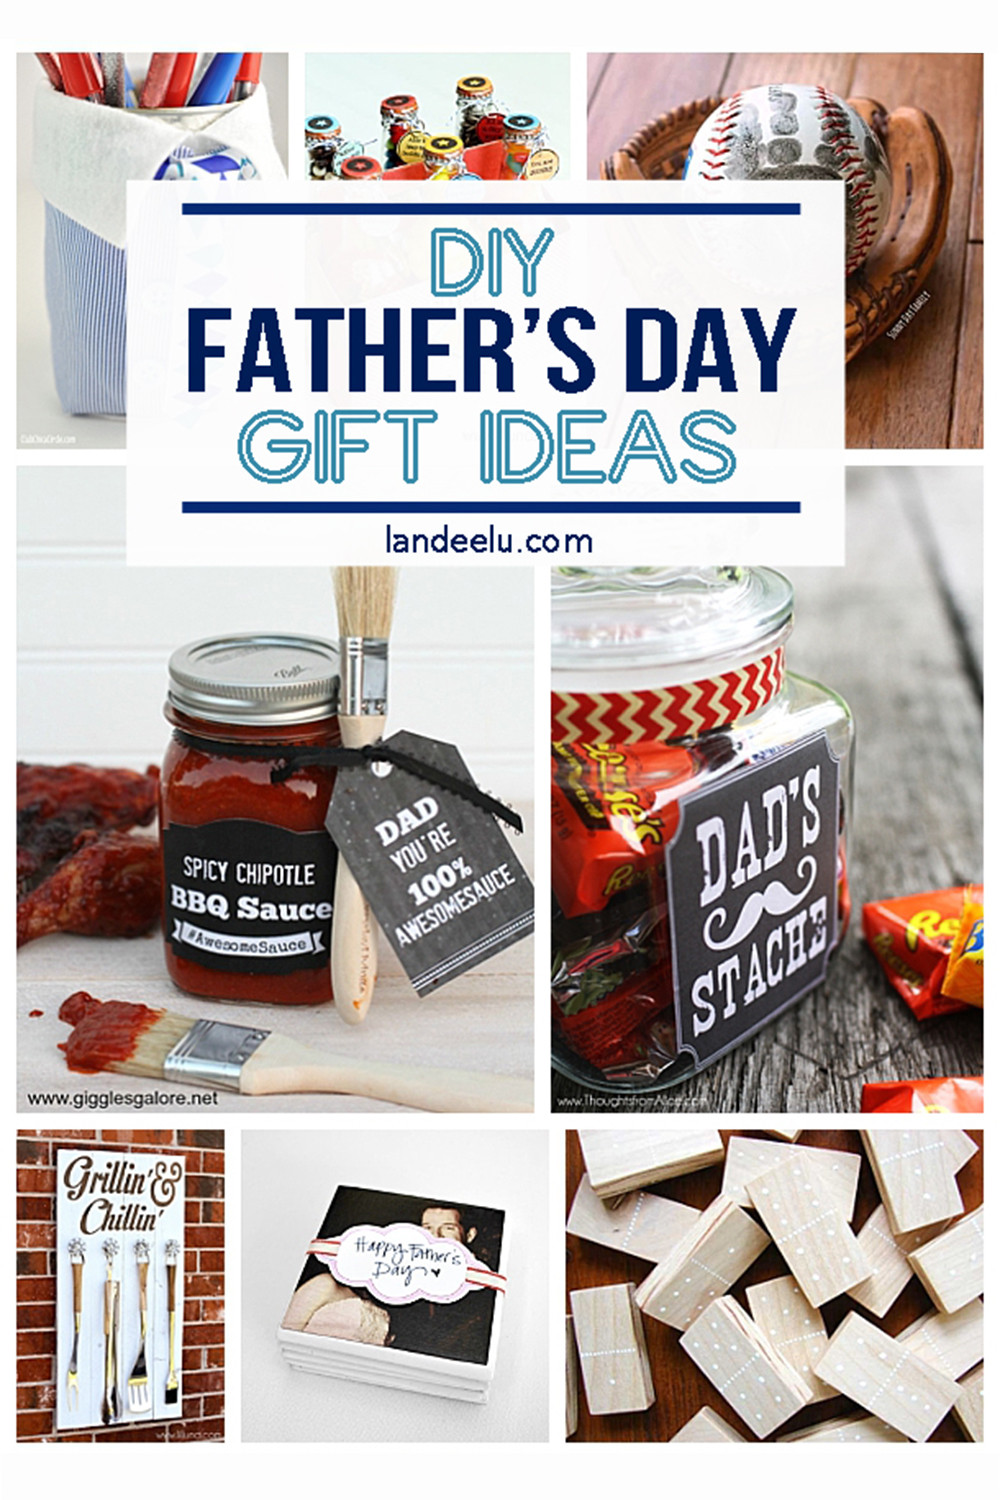 Fathersday Gift Ideas
 21 DIY Father s Day Gifts to Celebrate Dad landeelu